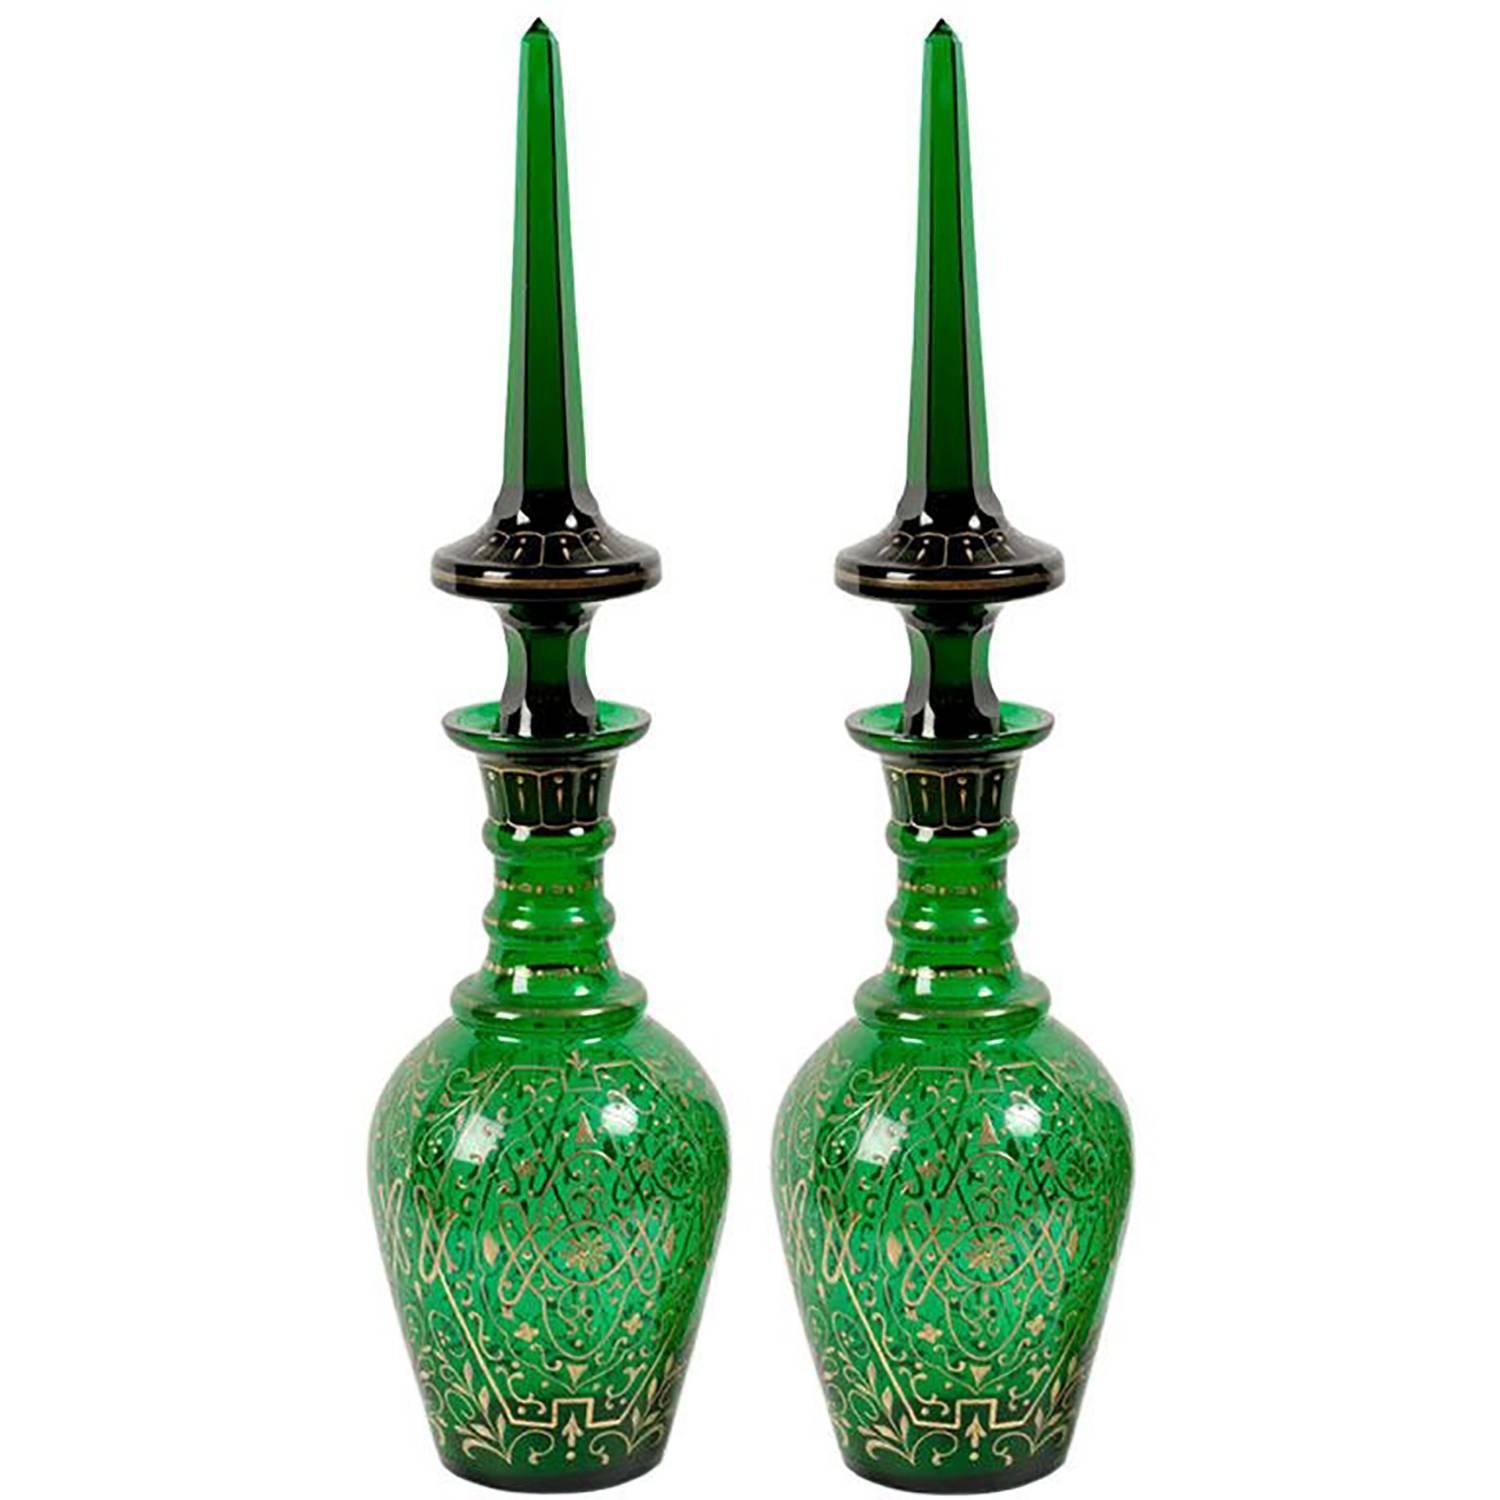 Pair of 1800's Tall Hand-Painted Parcel-Gilt Emerald Green Glass Decanters